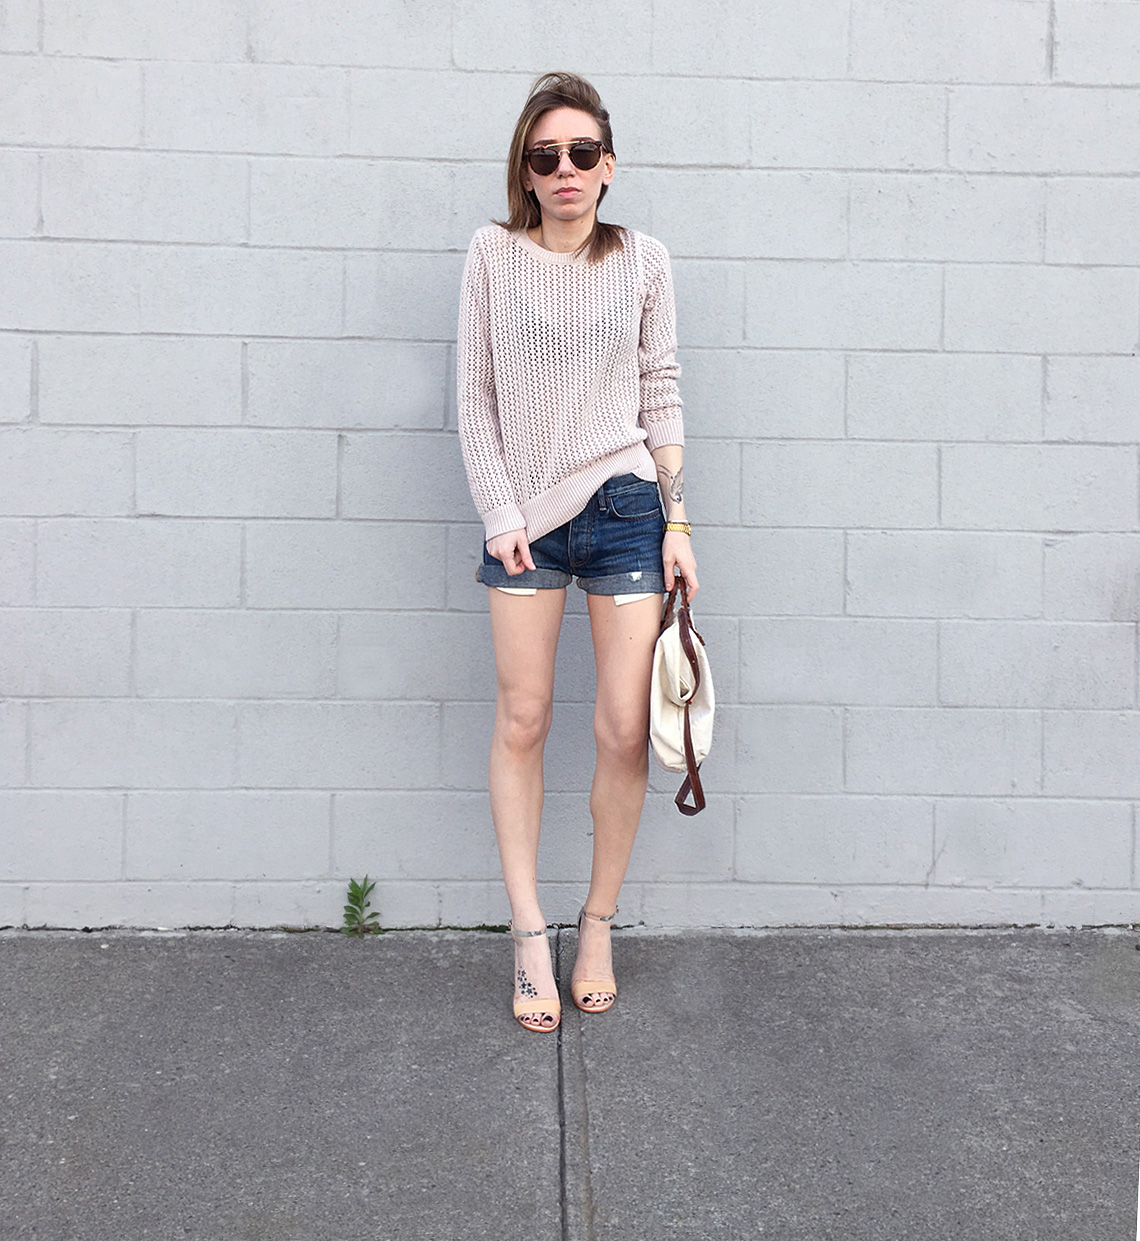 Pink sweater with denim shorts and heels outfit